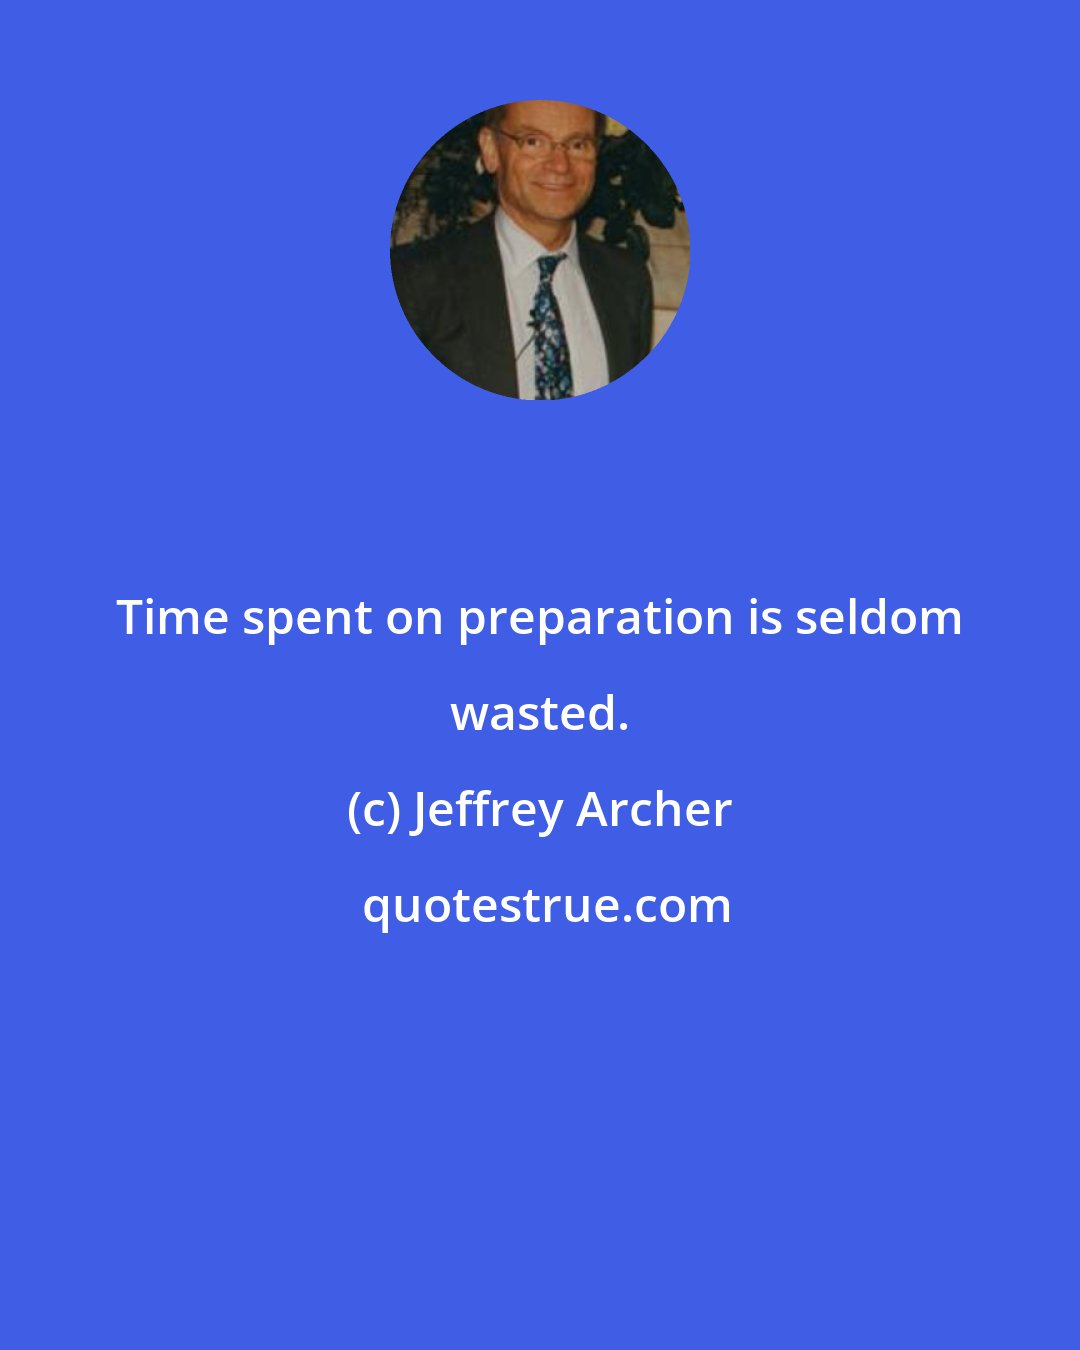 Jeffrey Archer: Time spent on preparation is seldom wasted.